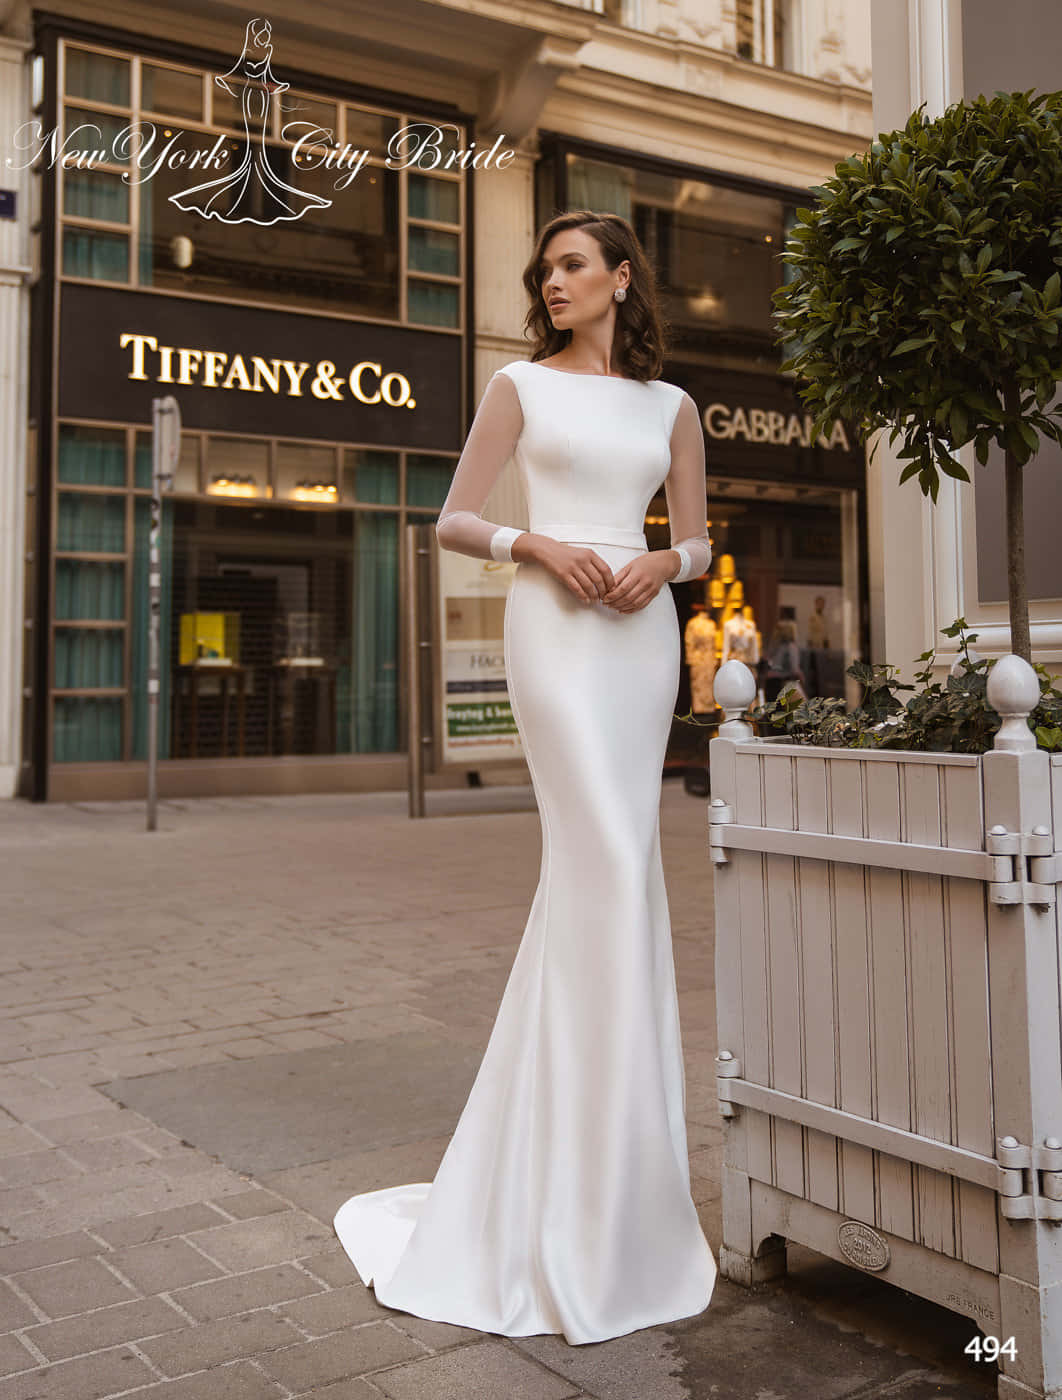 A stunning and sophisticated white wedding dress Wallpaper